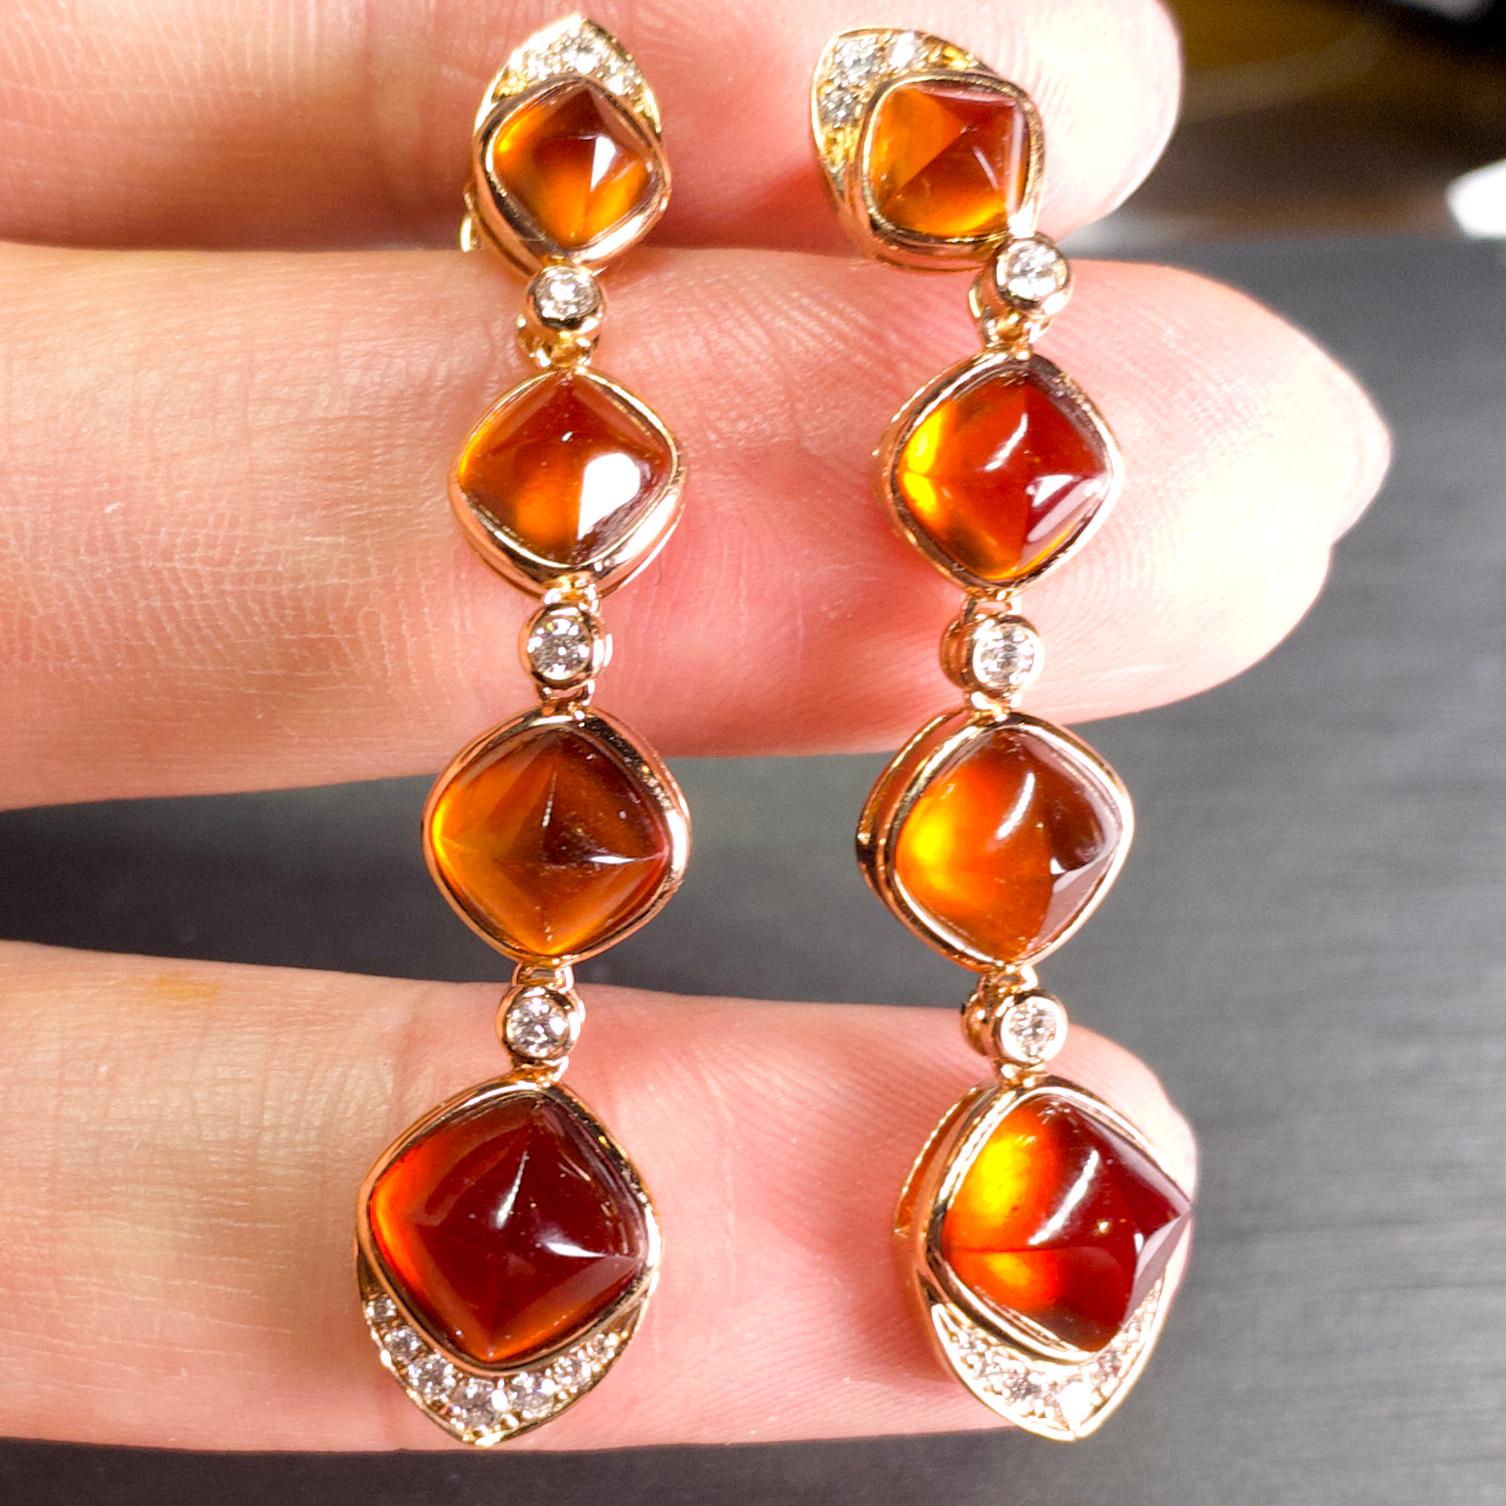 A pair of long chandelier style Spessartite Fanta Garnet and Diamond Earring in 18K Rose Gold. The earring is consist of 4 Spessartite garnet on each side, with top and bottom end encrusted in diamond. The remaining Spessartites are connected by